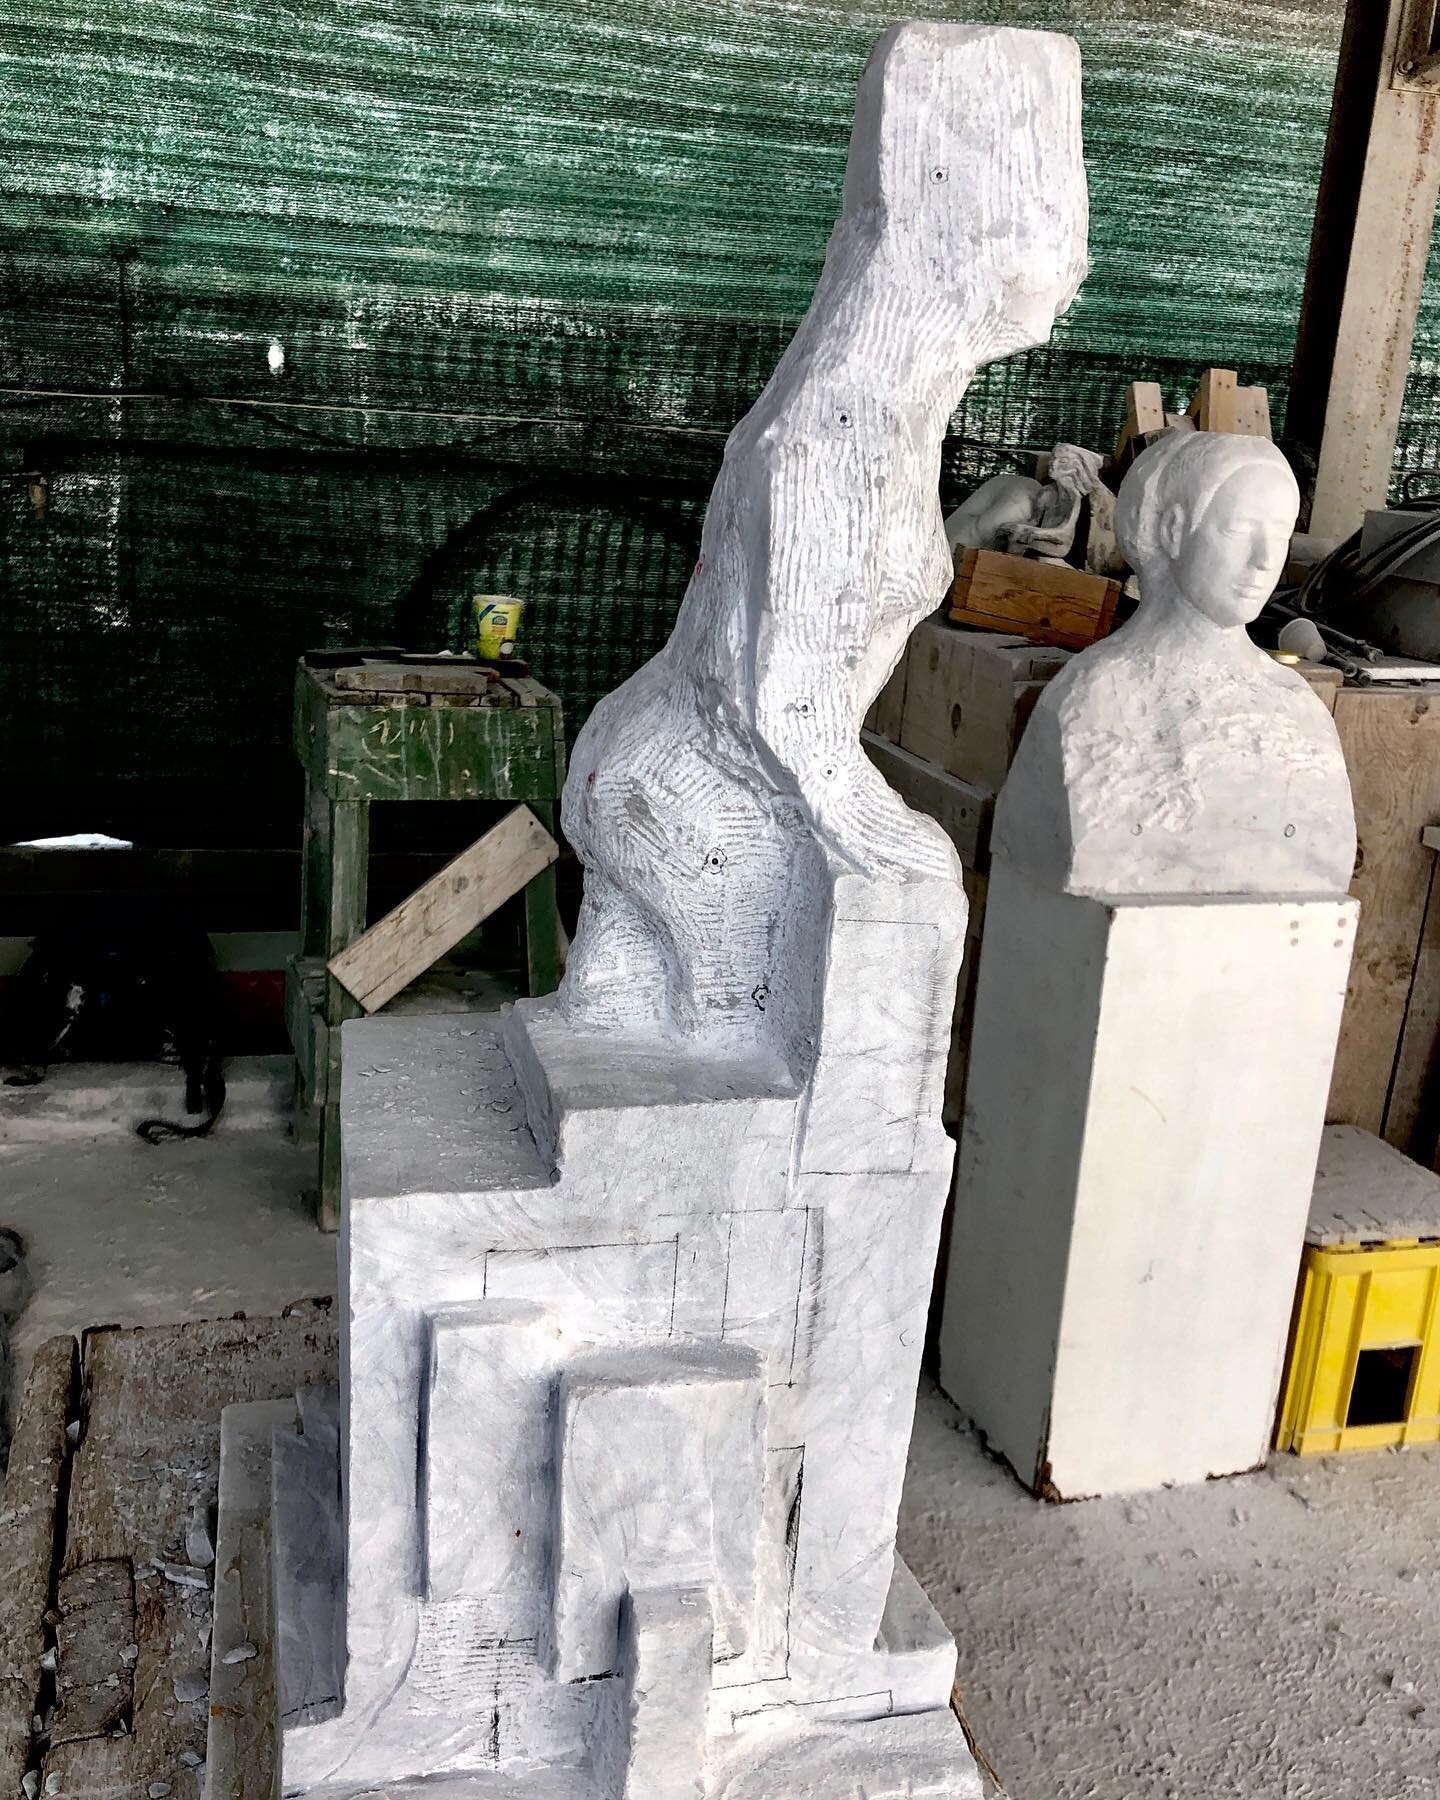 Loving the challenge of going back and forth between the curvature of the figure and the geometric planes of the base, and the different methods and tools required for each. It keeps both sides of my brain active.
#nyacademyofart #ABCStone #Carrara #